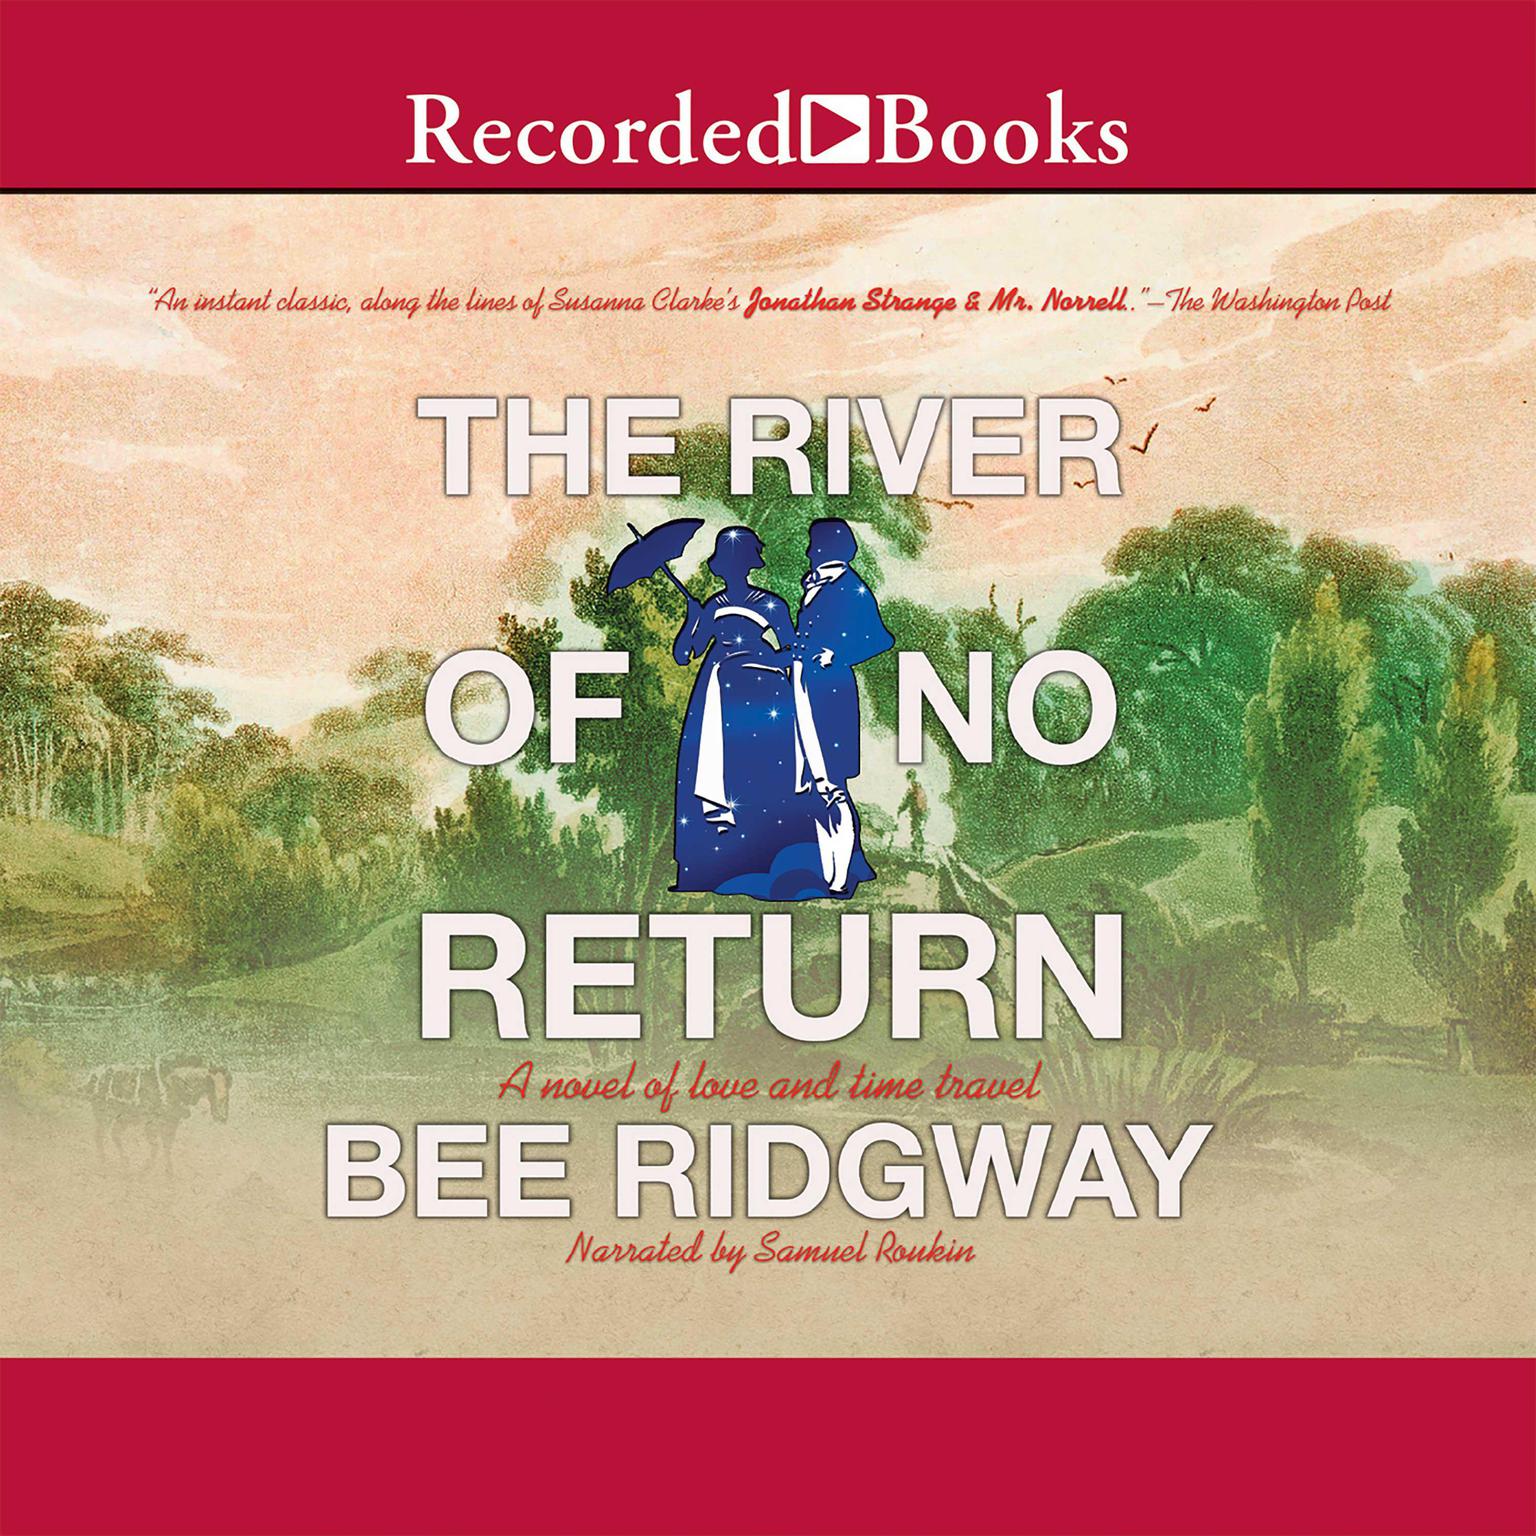 The River of No Return Audiobook, by Bee Ridgway